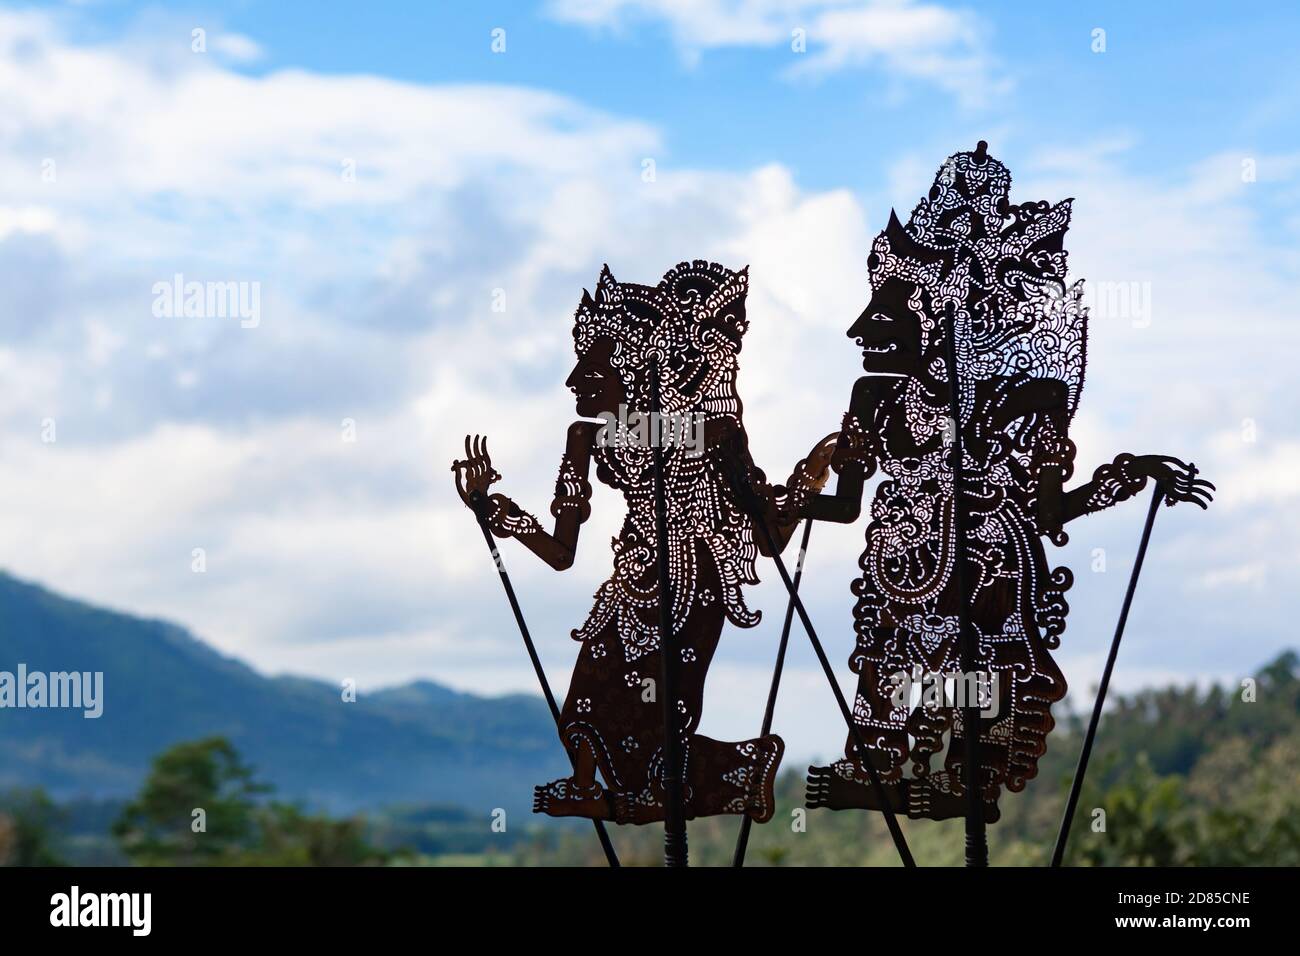 Black shadow silhouette of old traditional puppets of Bali Island - Wayang Kulit. Culture, religion, Arts festivals of Balinese and Indonesian people. Stock Photo